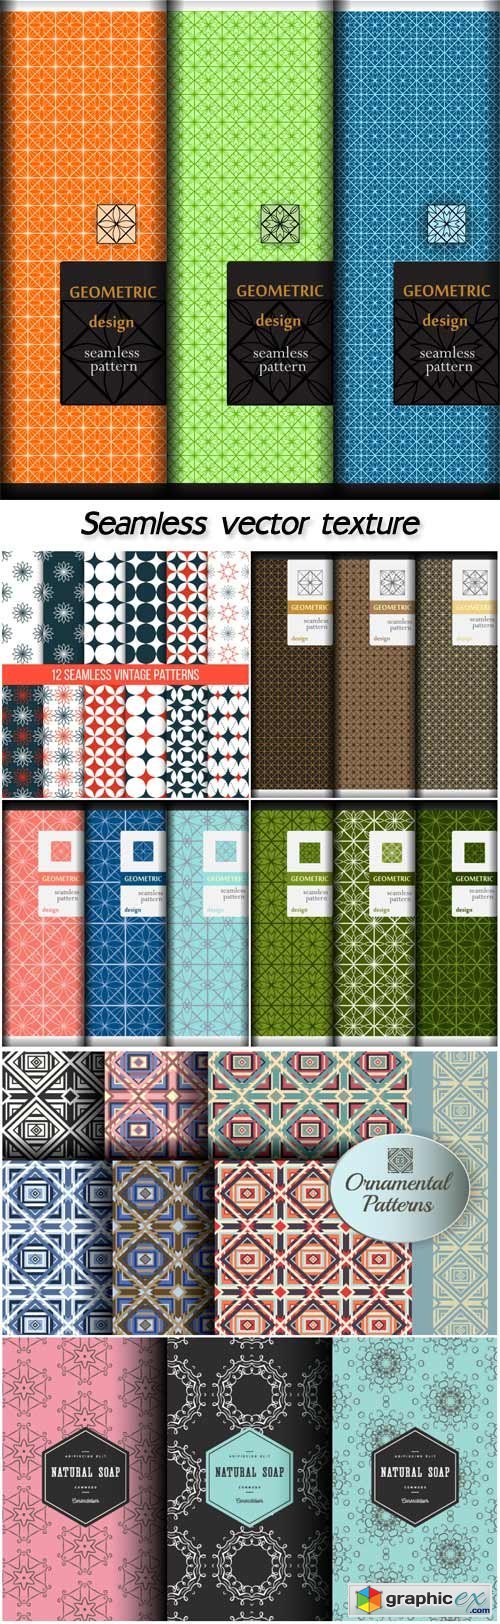 Seamless vector texture with geometric patterns